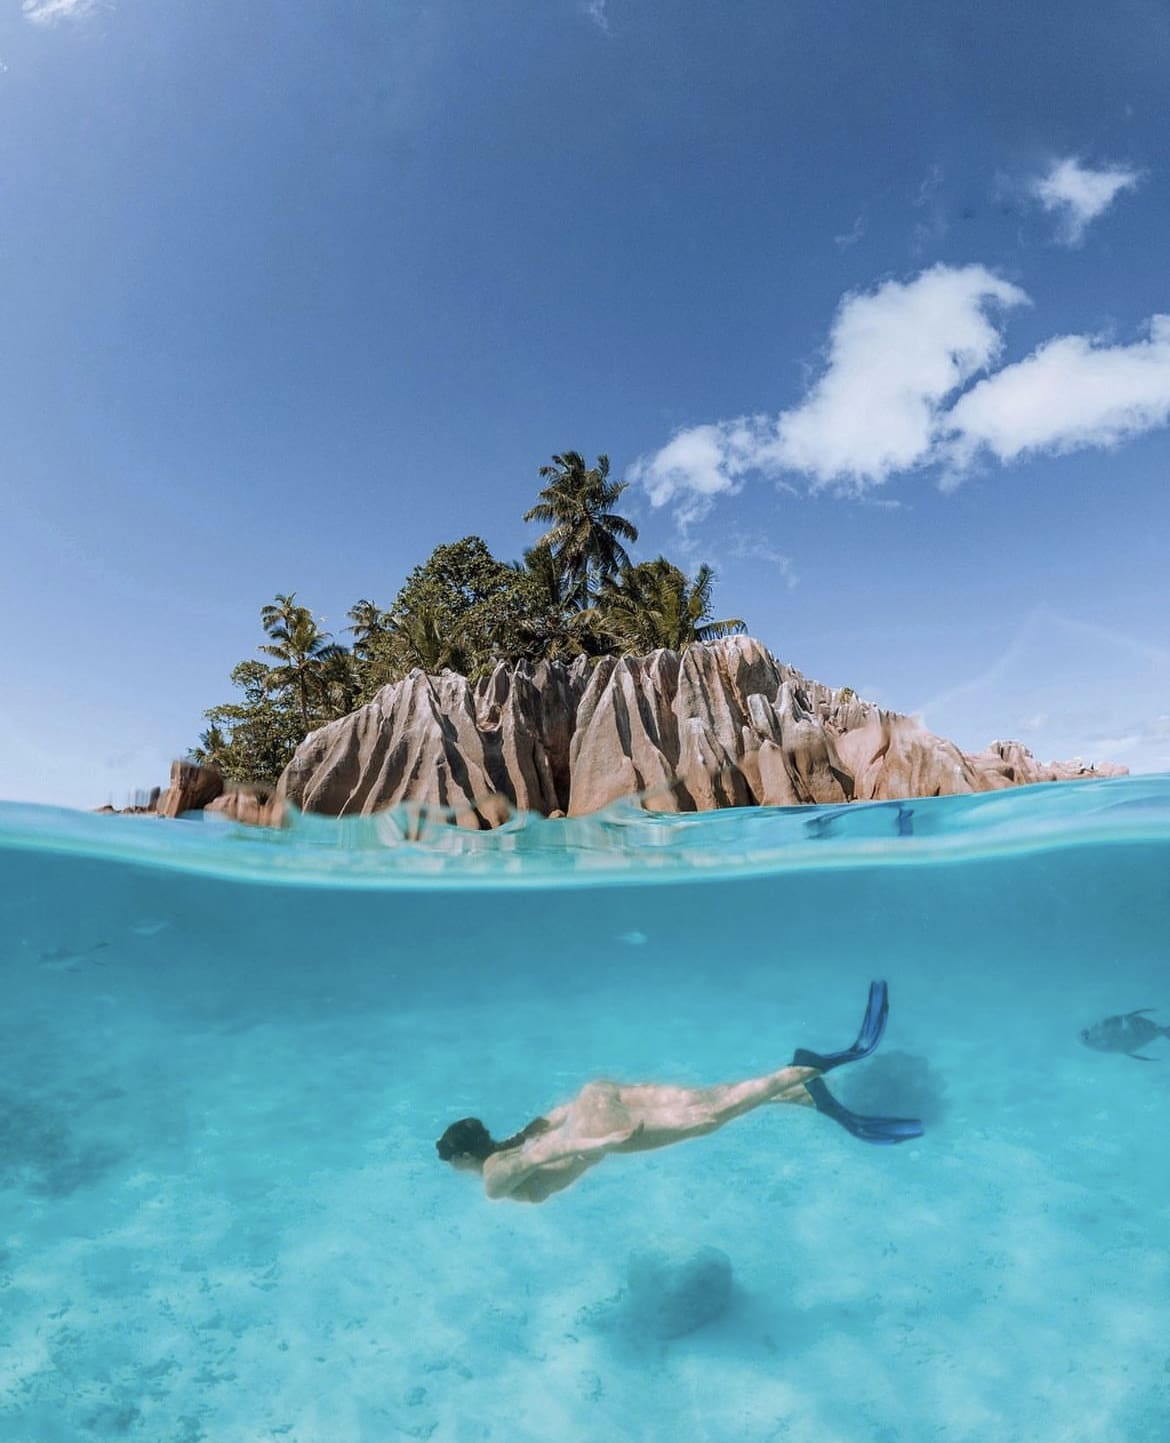 Free-diving in the crystal clear waters of the Seychelles